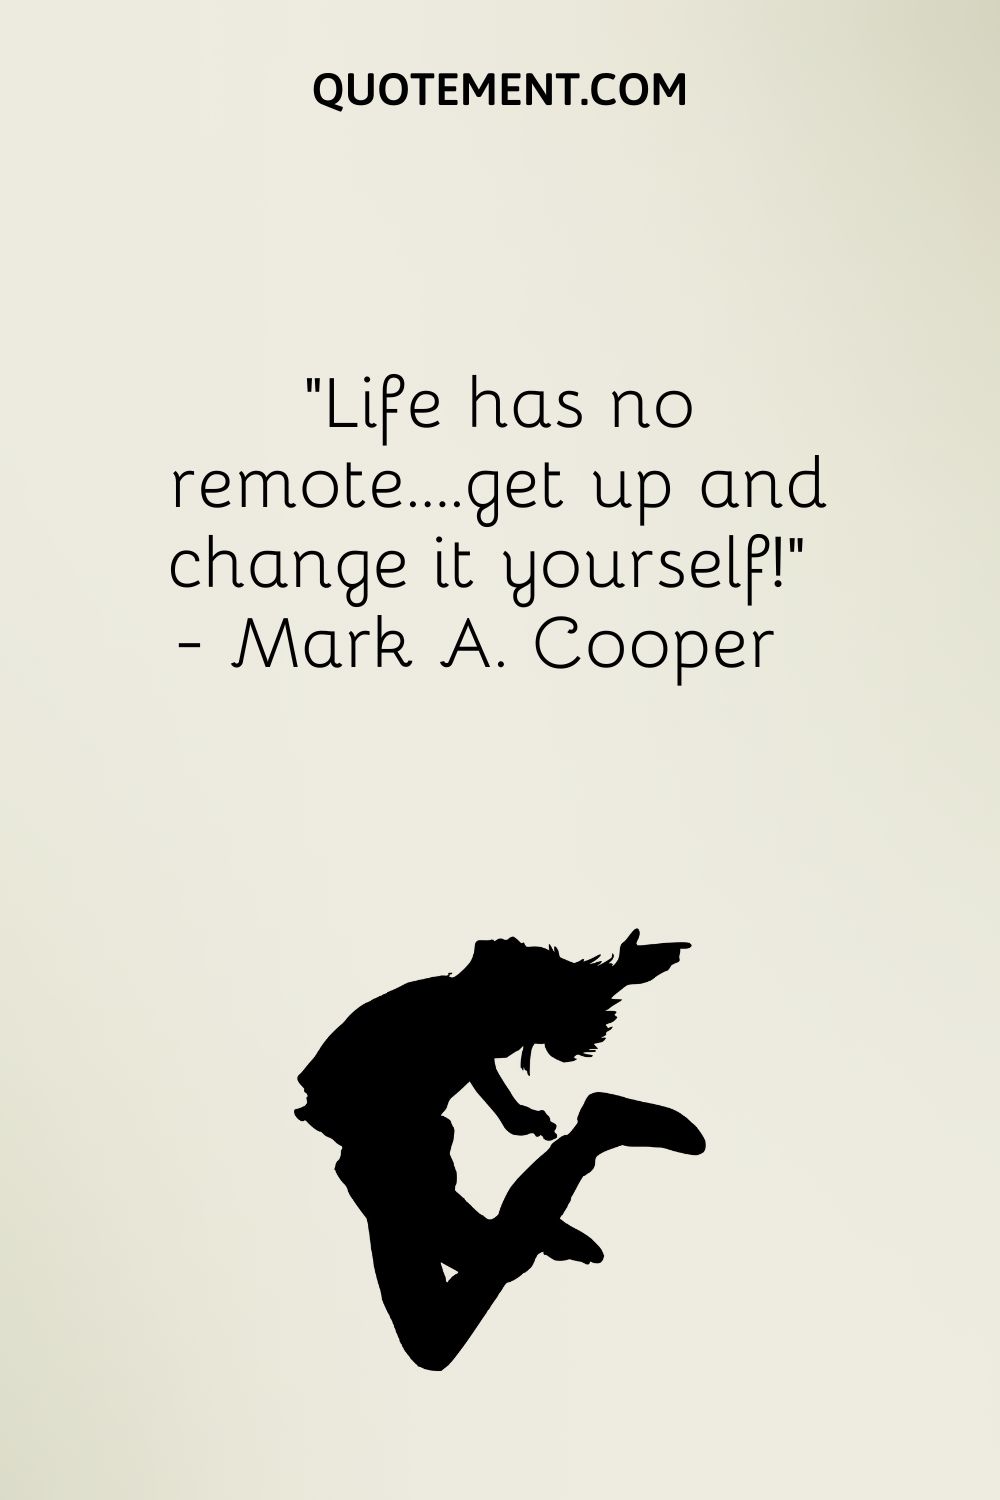 Life has no remote….get up and change it yourself